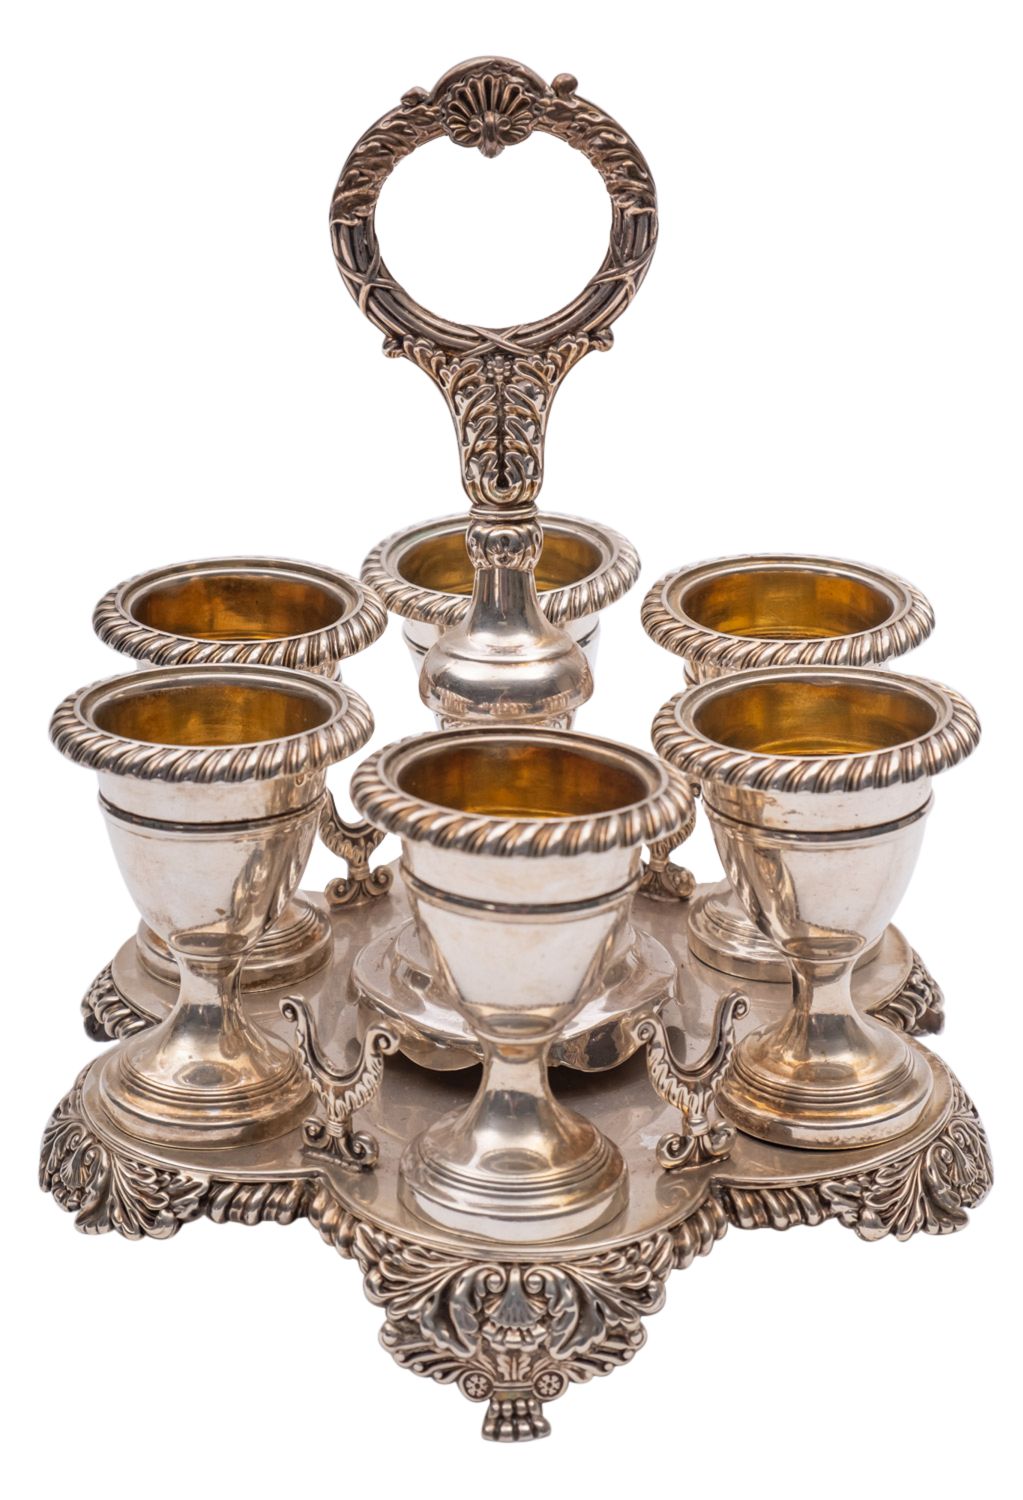 A late George III silver hexafoil egg stand by Smith, Tate & Co.